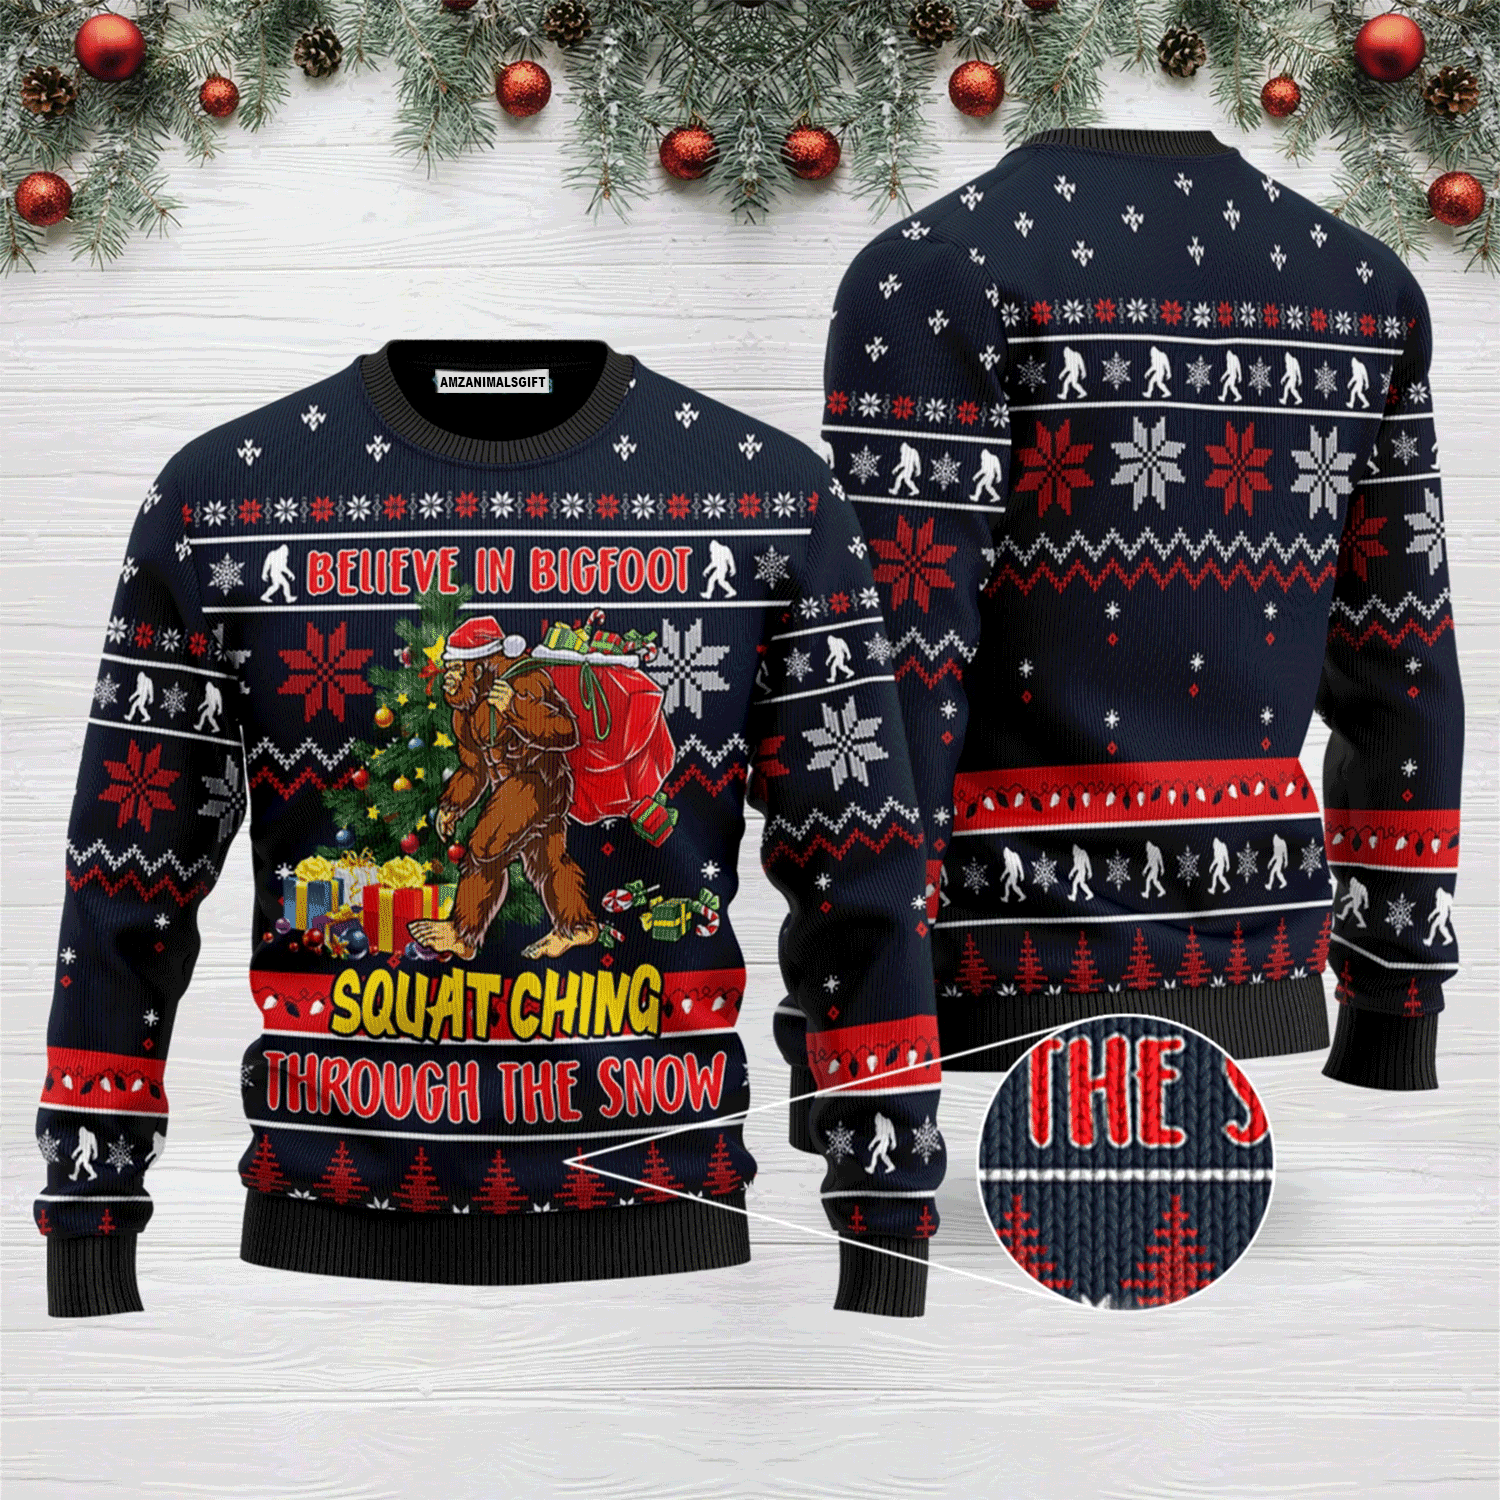 Bigfoot Squats Ching Sweater Through The Snow, Ugly Christmas Sweater For Men & Women, Perfect Outfit For Christmas New Year Autumn Winter